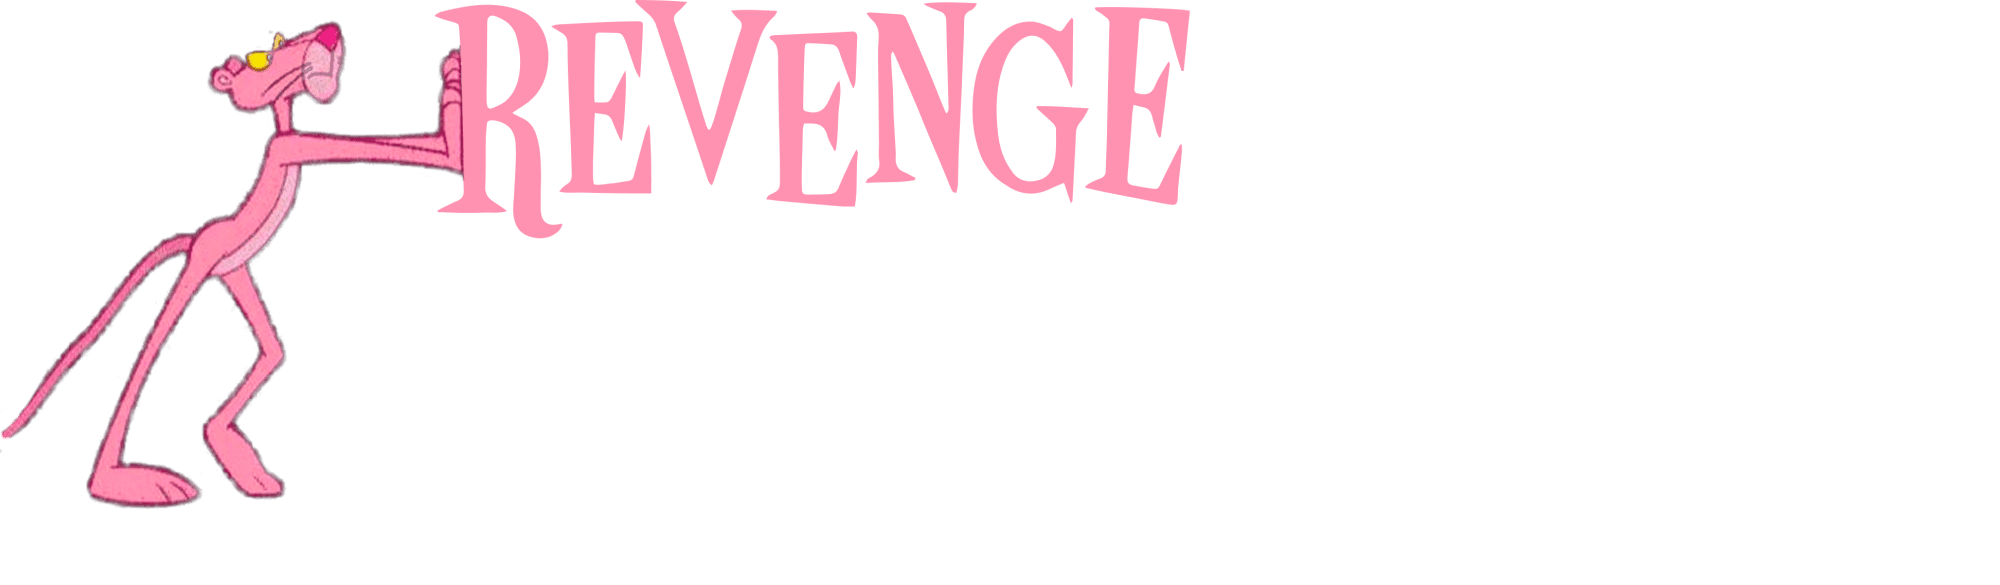 Revenge of the Pink Panther logo